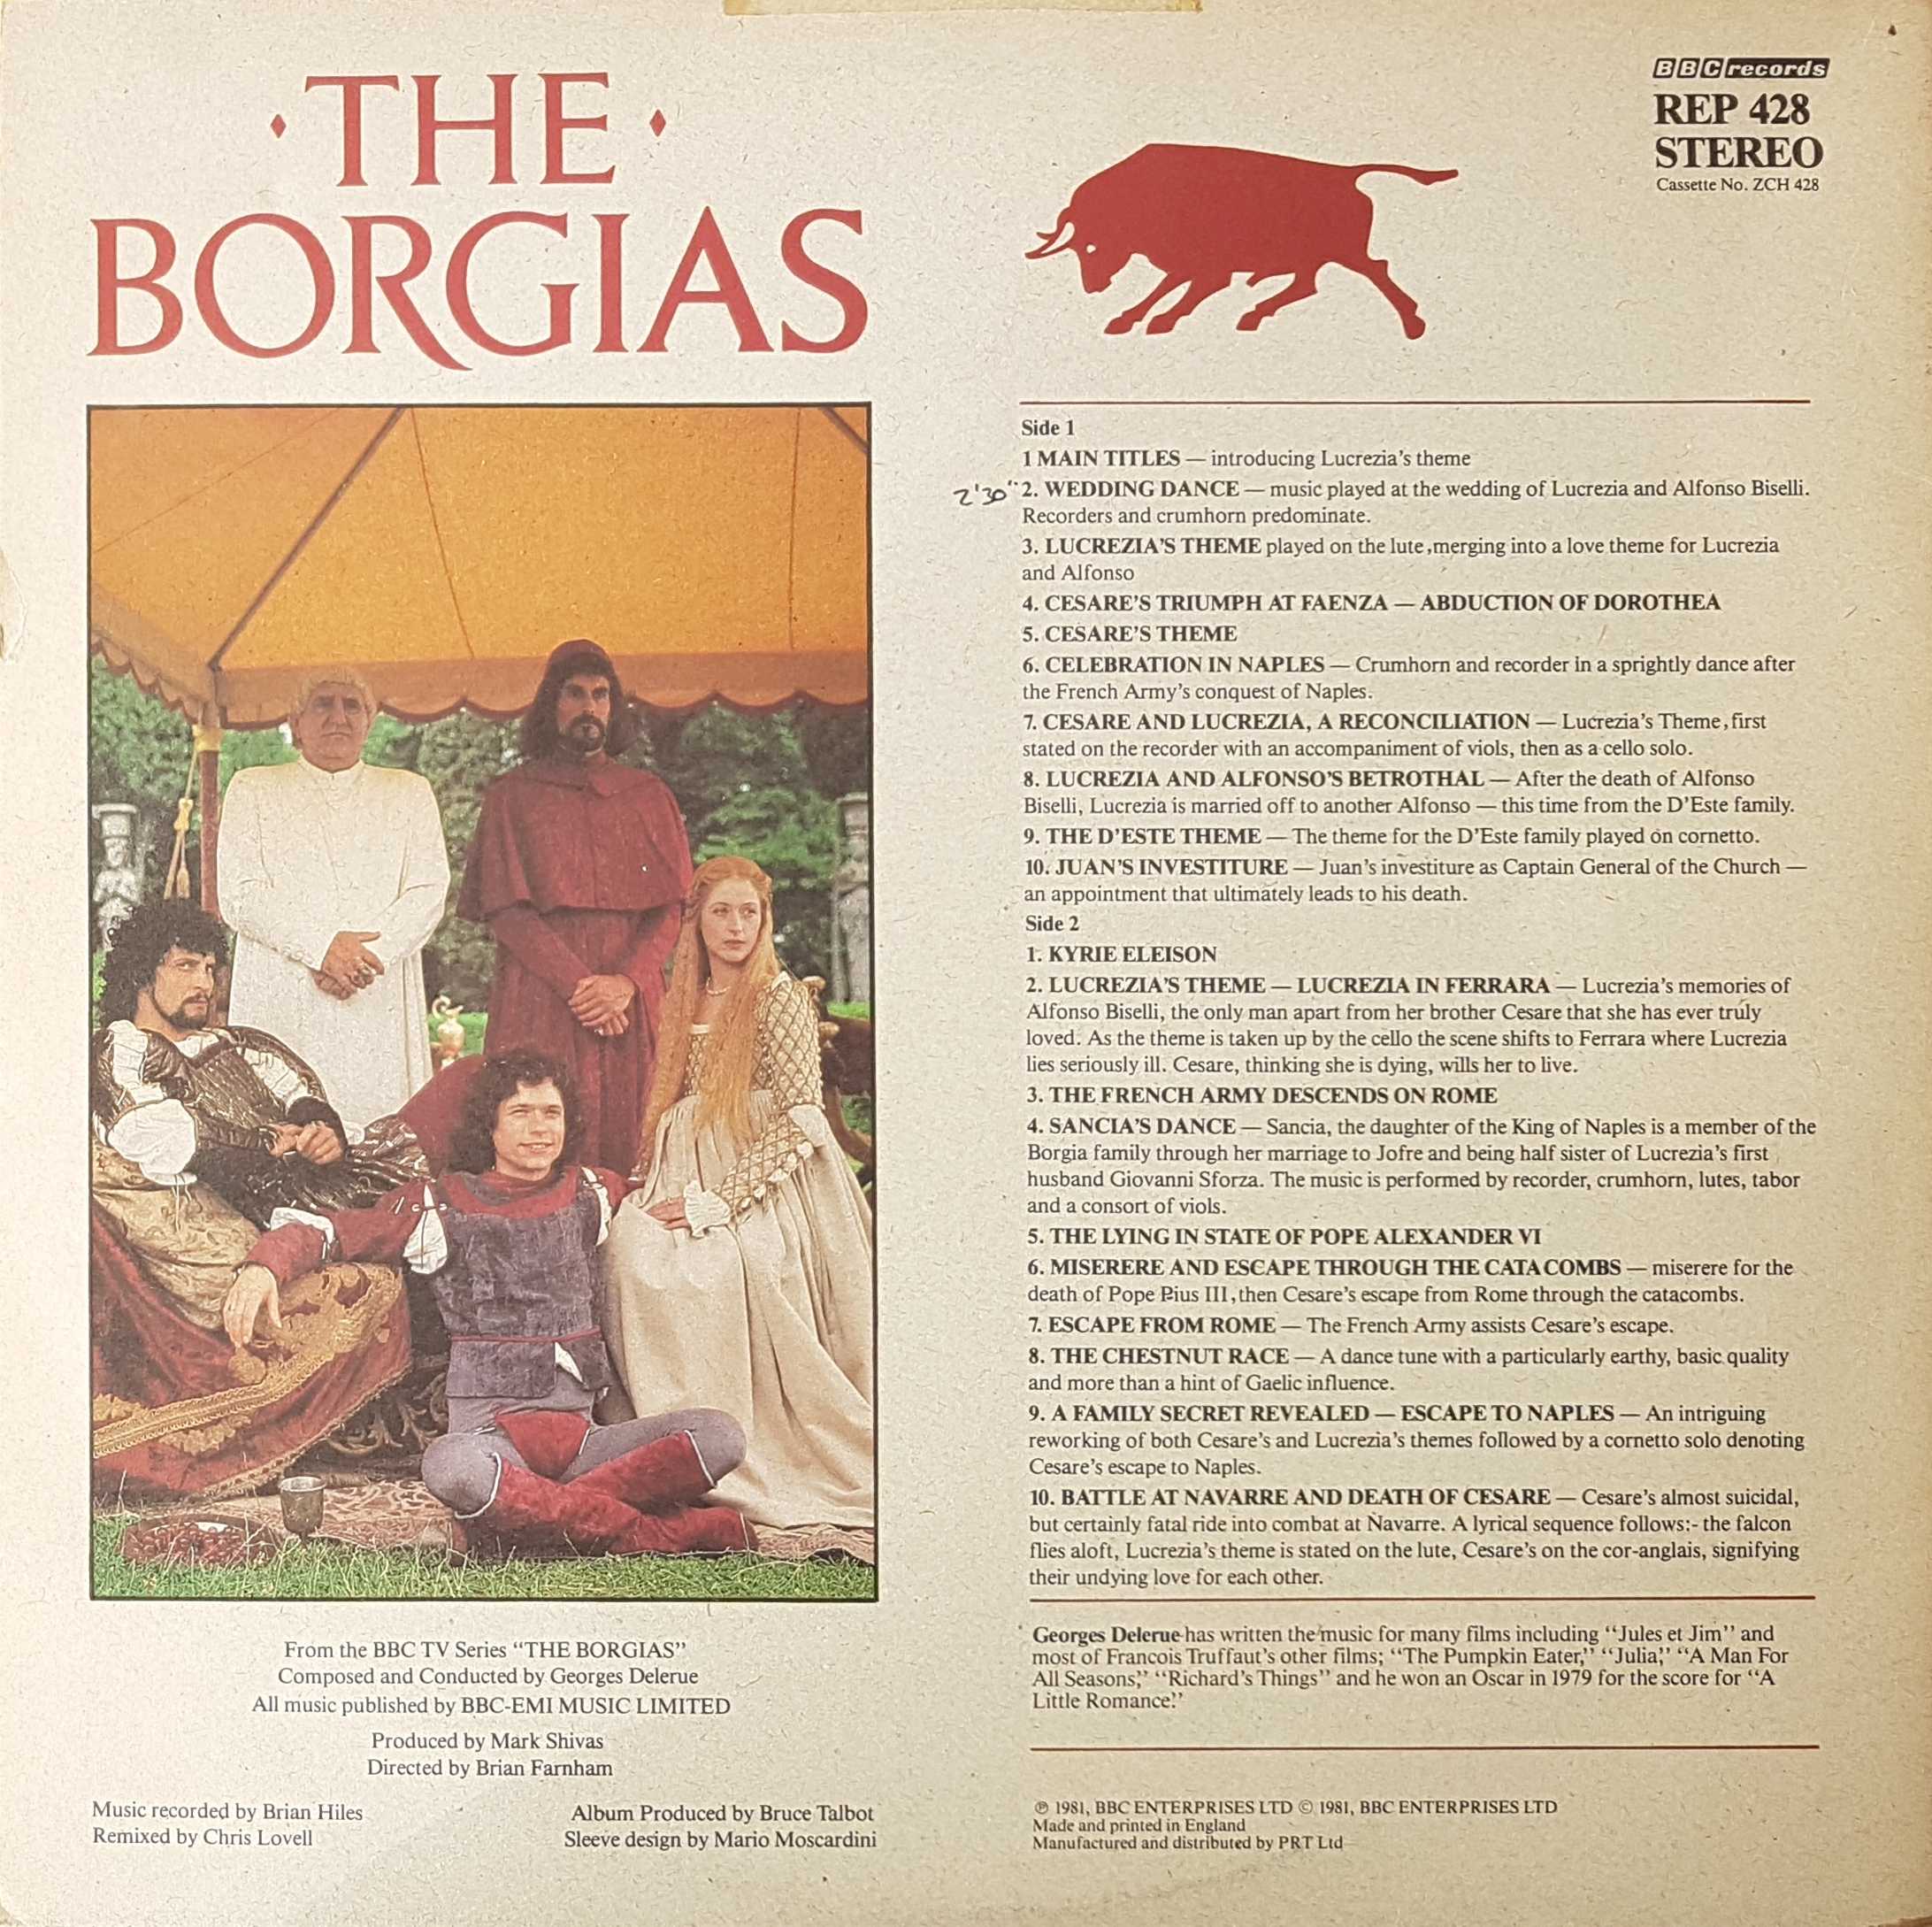 Picture of REP 428 Borgias by artist George Delerue from the BBC records and Tapes library